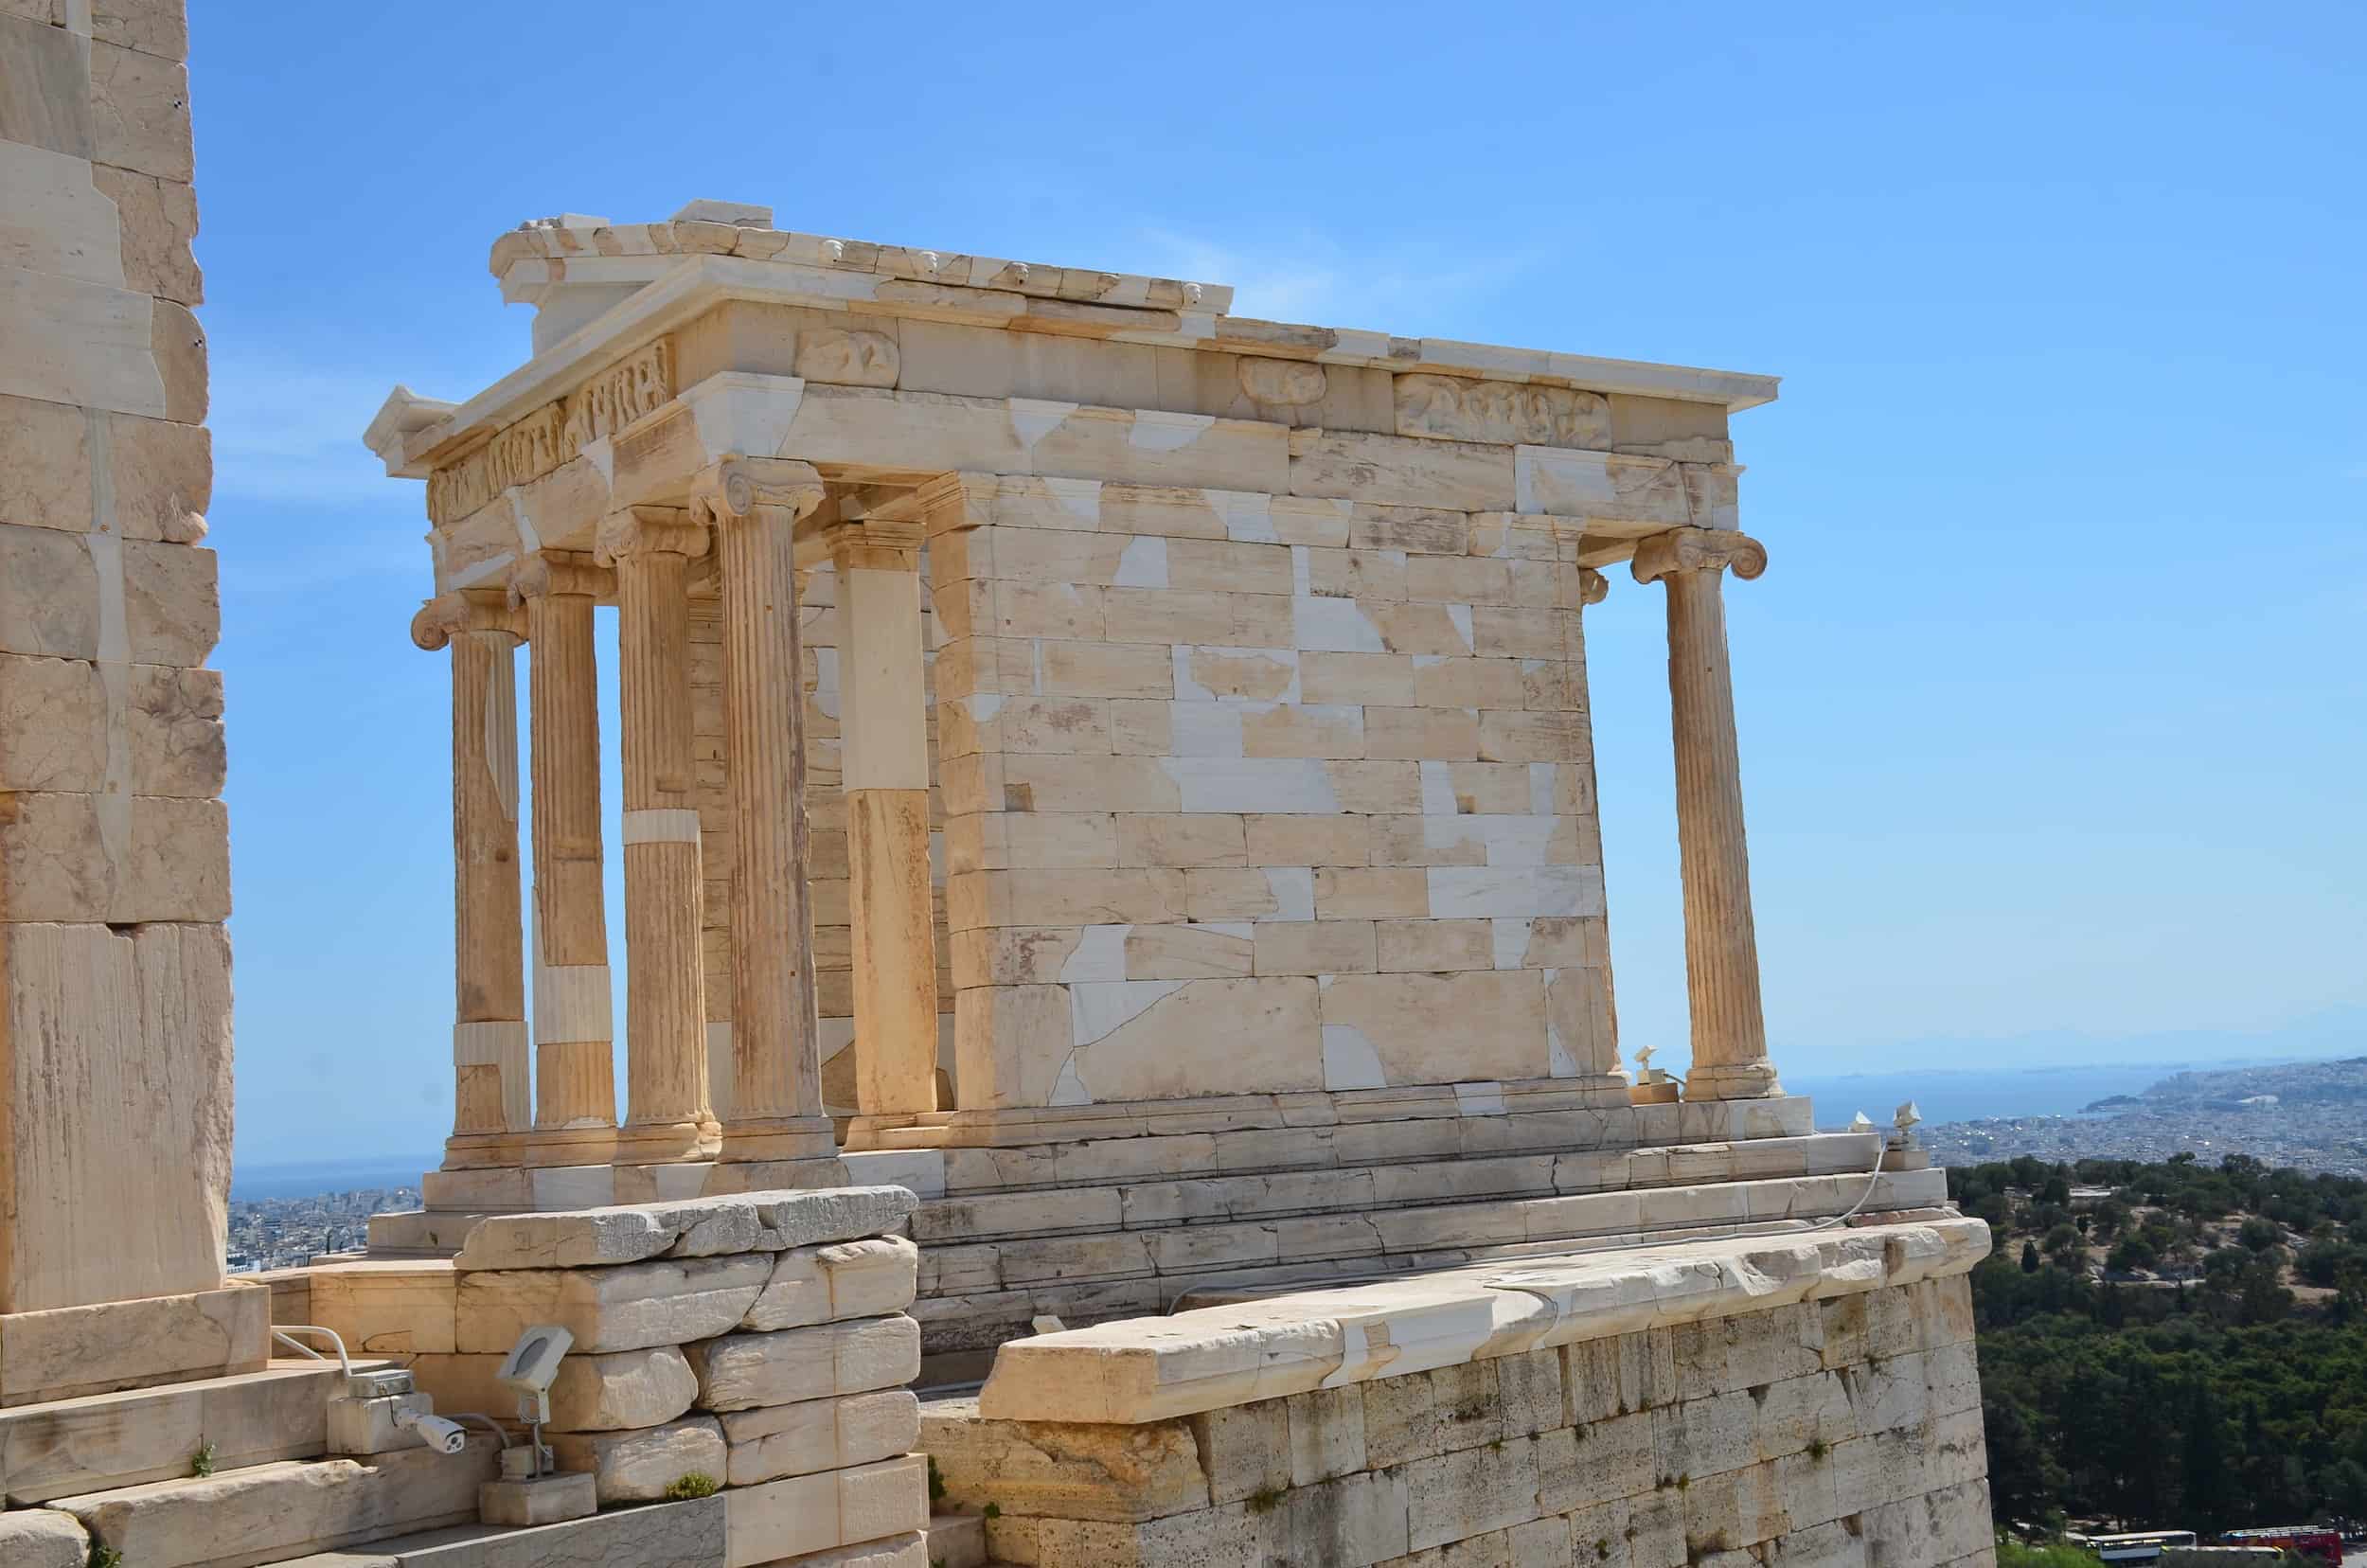 Temple of Athena Nike at the Acropolis in Athens, Greece